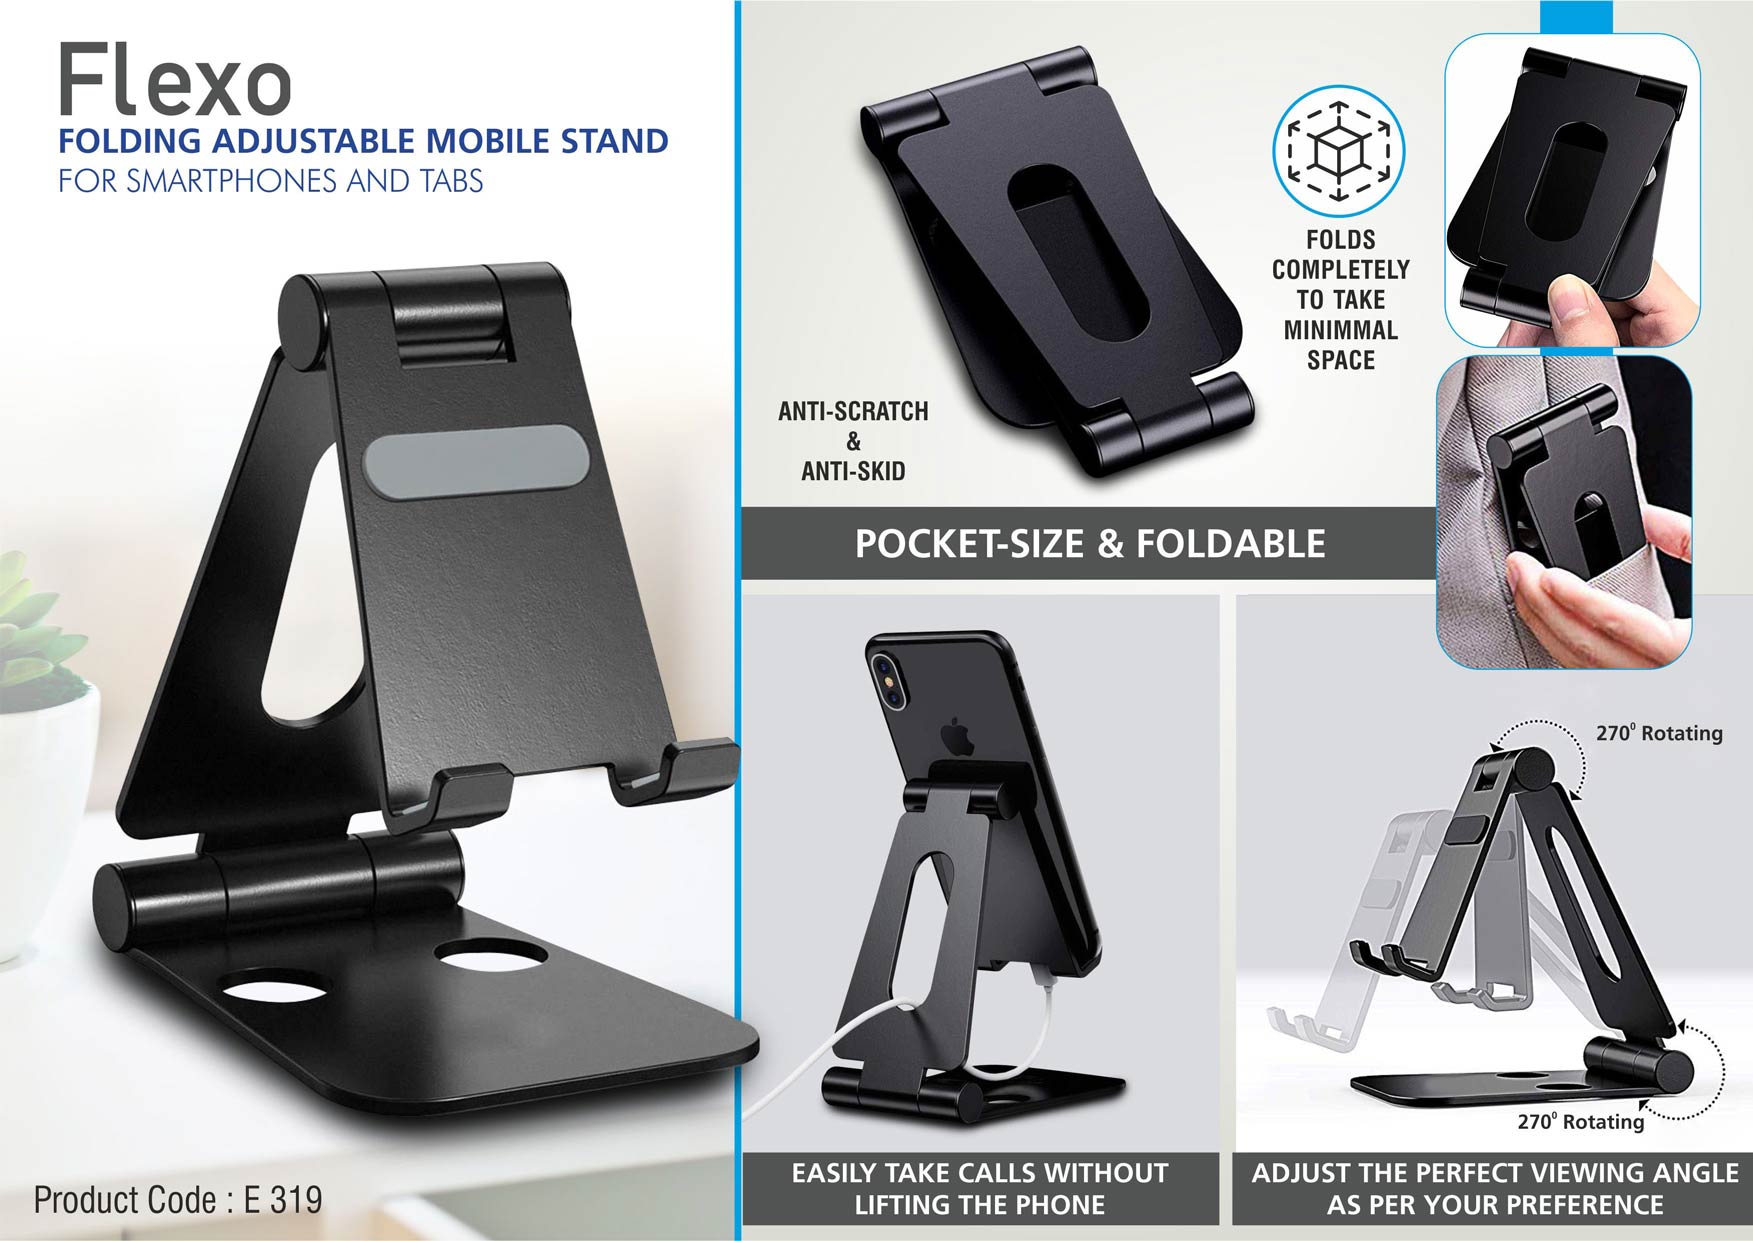 Flexo: Folding Metal Mobile Stand For Smartphones And Tabs | Folds Completely To Take Minimal Space | 3 Fold Style With Double Angle Adjustment